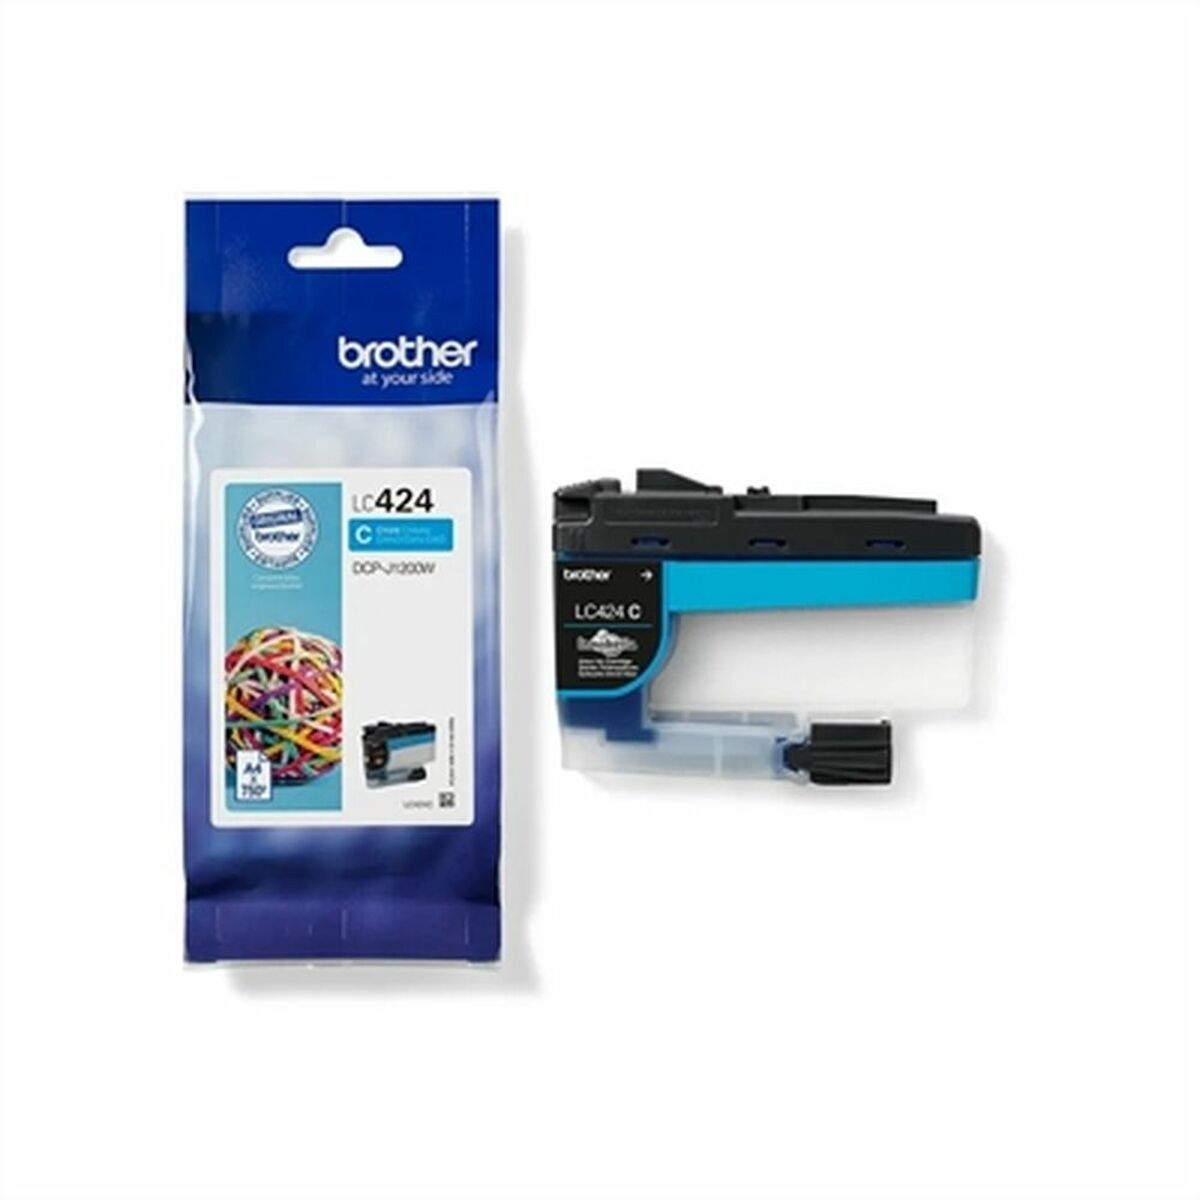 Original Ink Cartridge Brother LC424, Brother, Computing, Printers and accessories, original-ink-cartridge-brother-lc424, Brand_Brother, category-reference-2609, category-reference-2642, category-reference-2874, category-reference-t-19685, category-reference-t-19911, category-reference-t-21377, category-reference-t-25688, Colour_Black, Colour_Cyan, Colour_Magenta, Colour_Yellow, Condition_NEW, office, Price_20 - 50, Teleworking, vuelta al cole, RiotNook